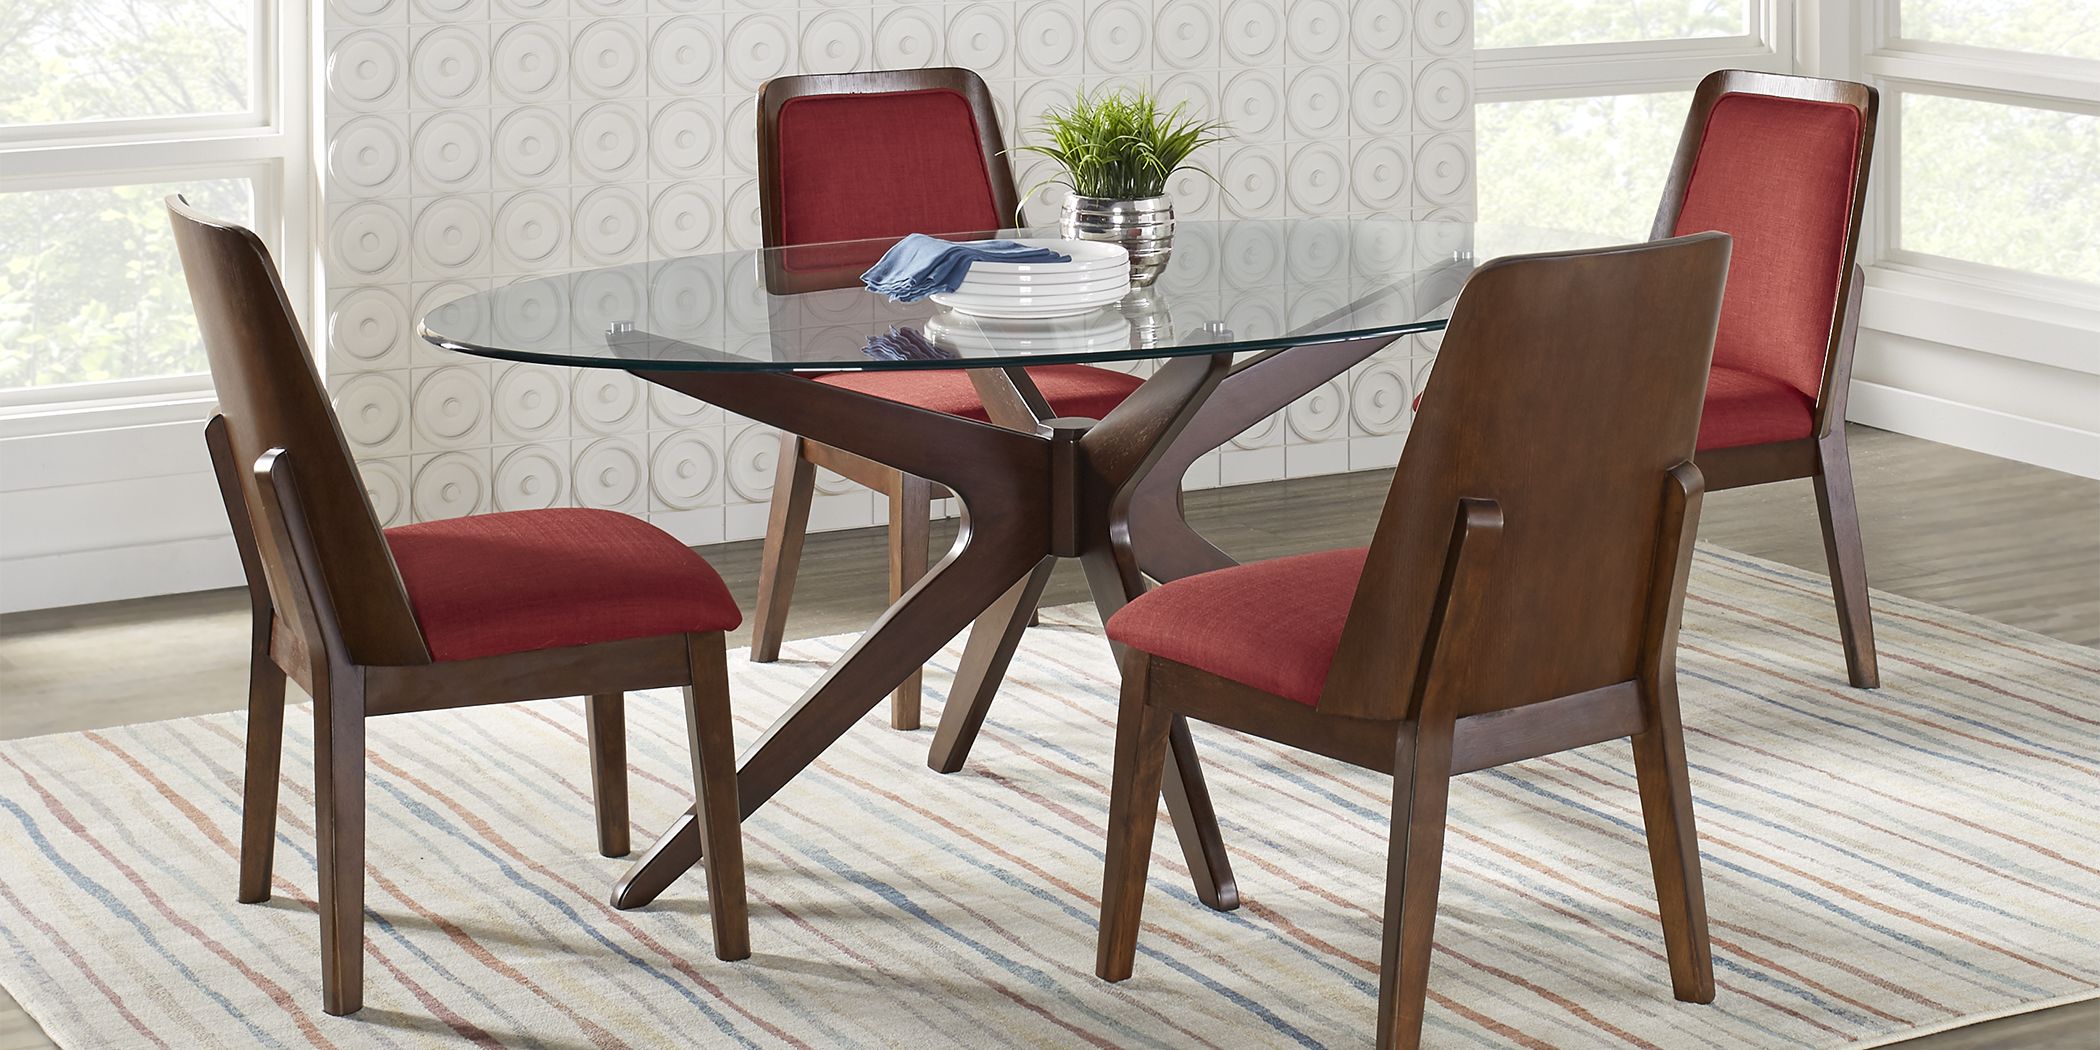 Delmon Walnut 5 Pc Oval Dining Set with Burgundy Chairs